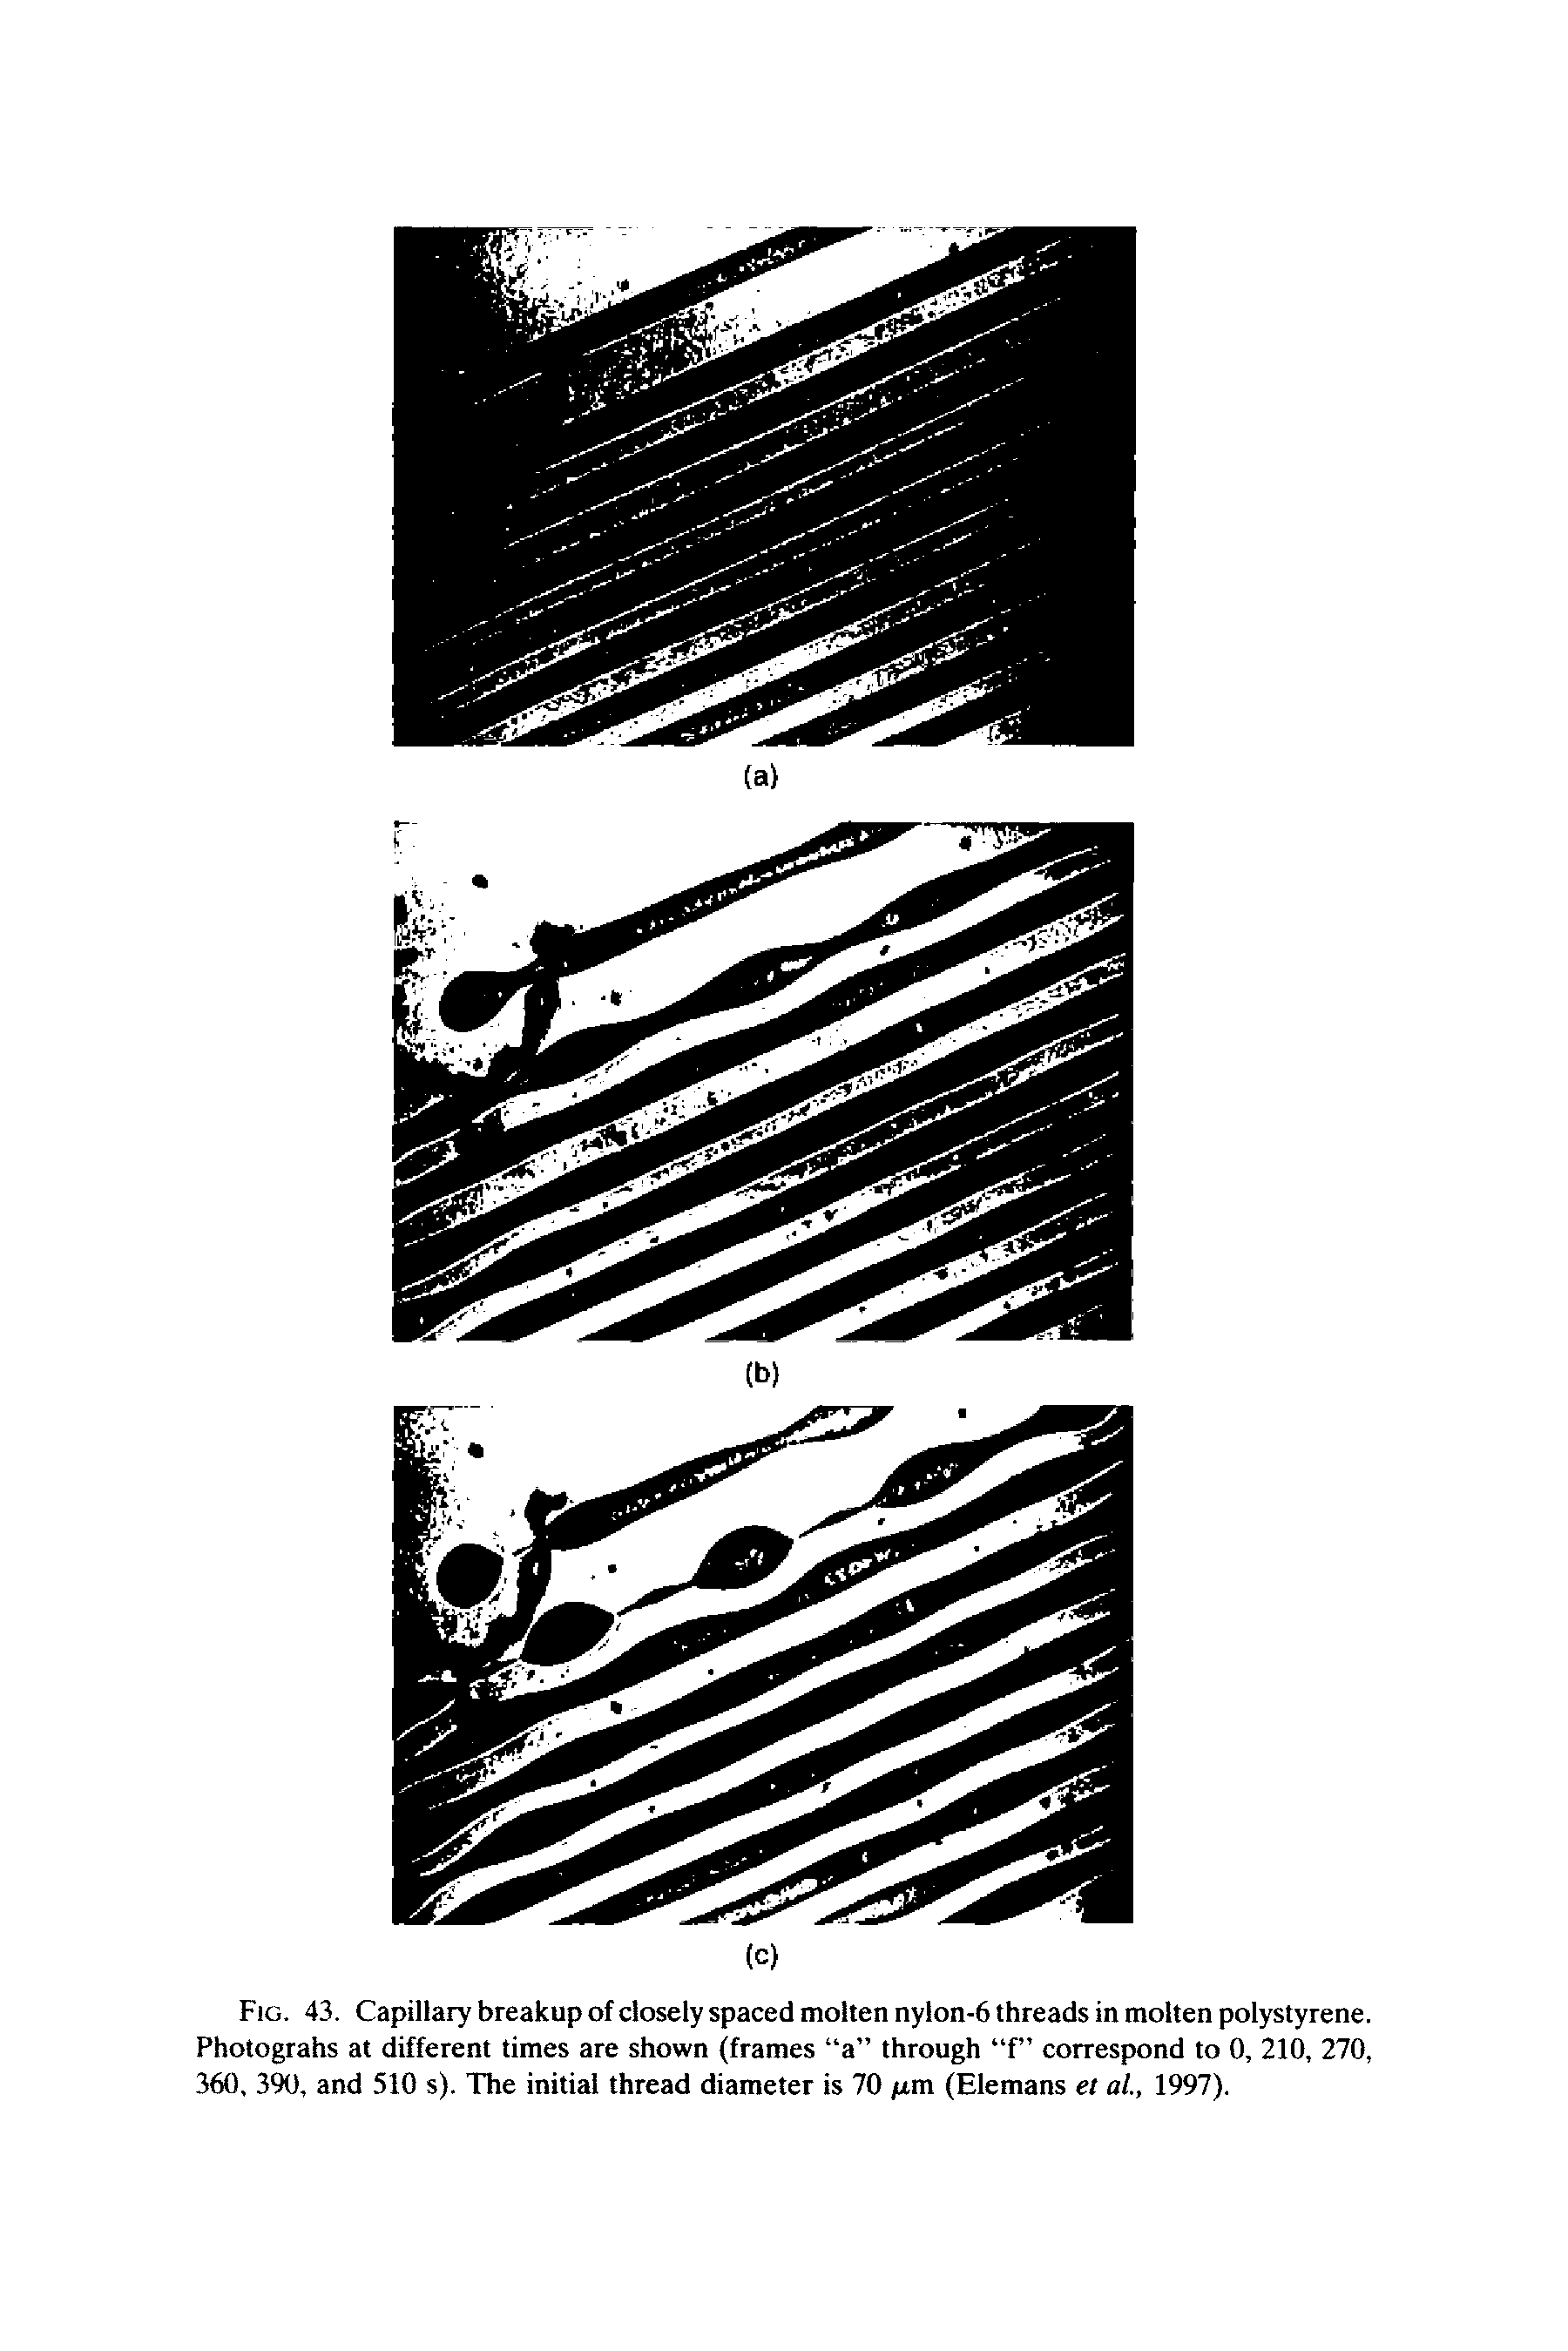 Fig. 43. Capillary breakup of closely spaced molten nylon-6 threads in molten polystyrene. Photograhs at different times are shown (frames a through f correspond to 0, 210, 270, 360, 390, and 510 s). The initial thread diameter is 70 fim (Elemans el at., 1997).